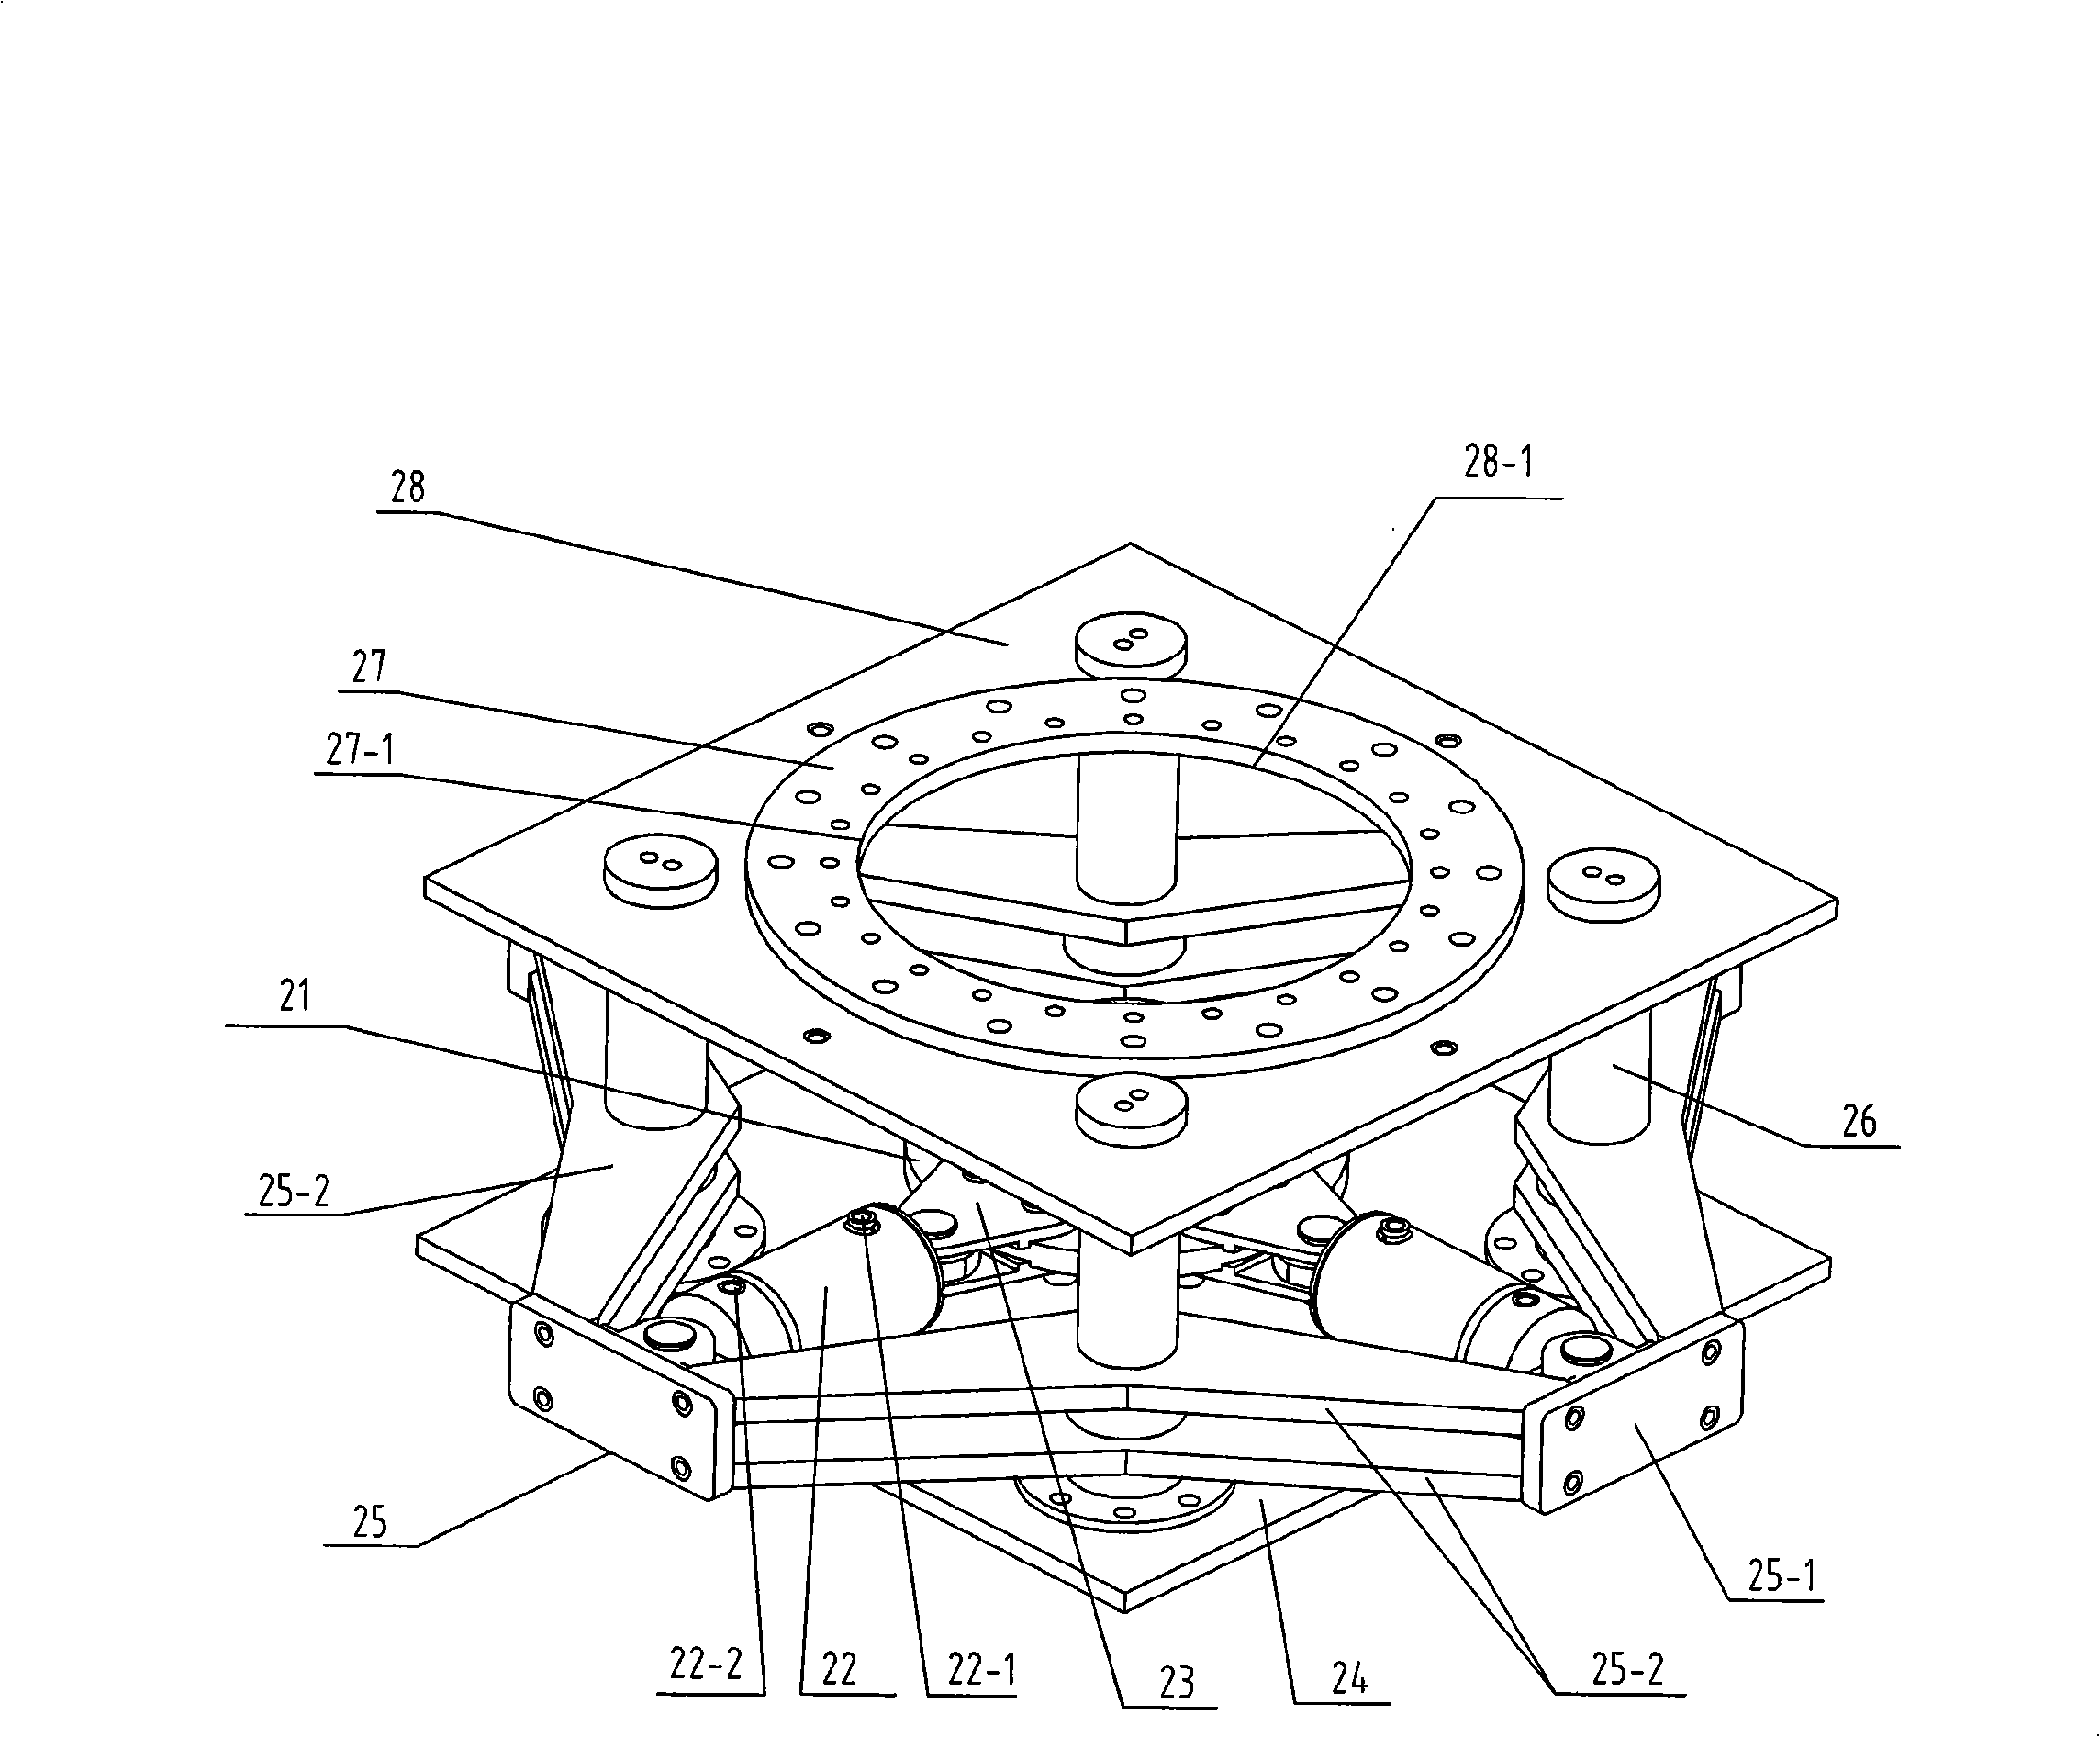 Passive movement loading system of watercraft steering engine with varying load torque